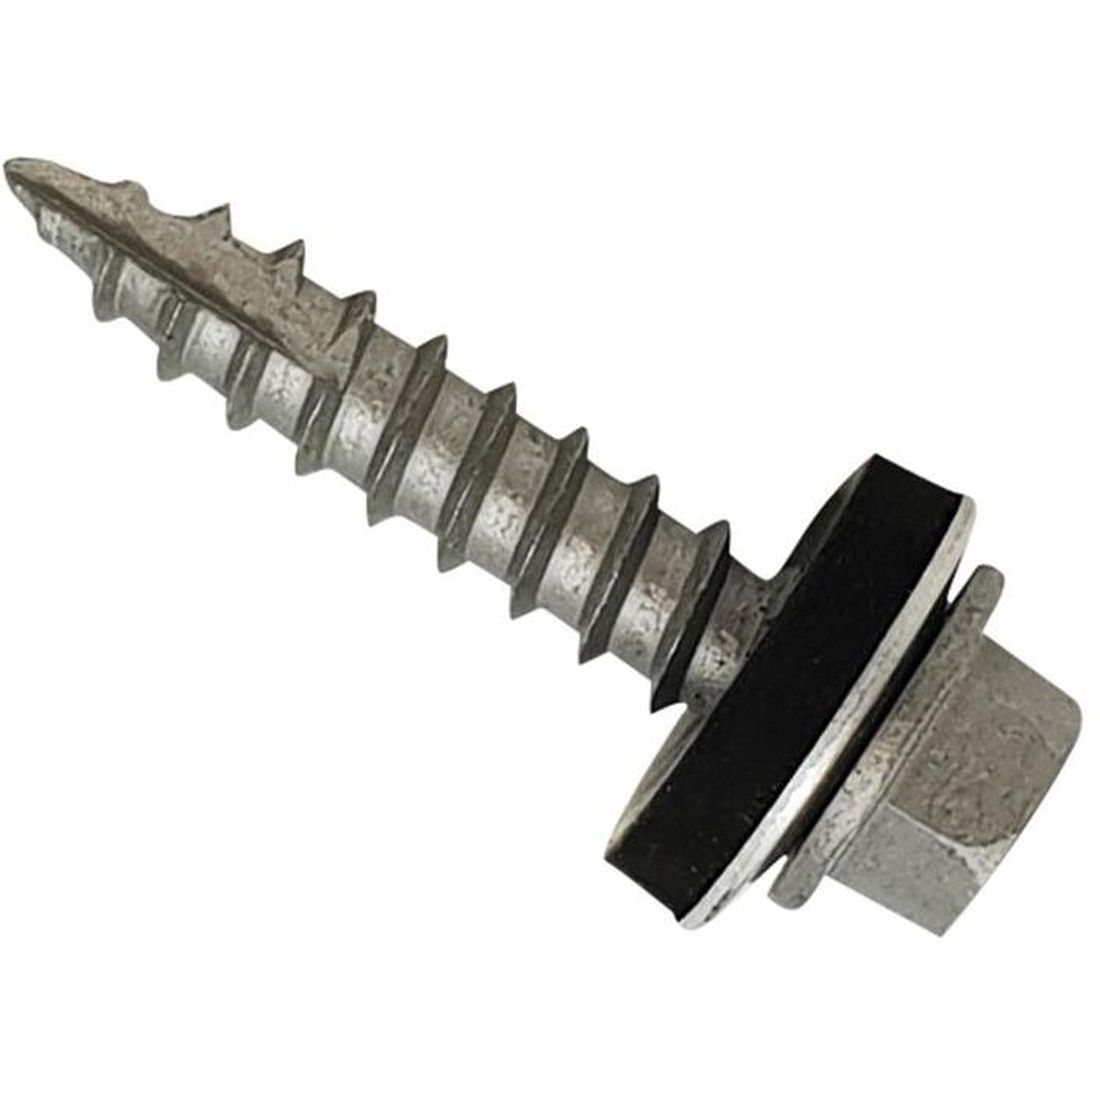 ForgeFix TechFast Metal Roofing to Timber Hex Screw T17 Gash Point 6.3 x 150mm Box 50    